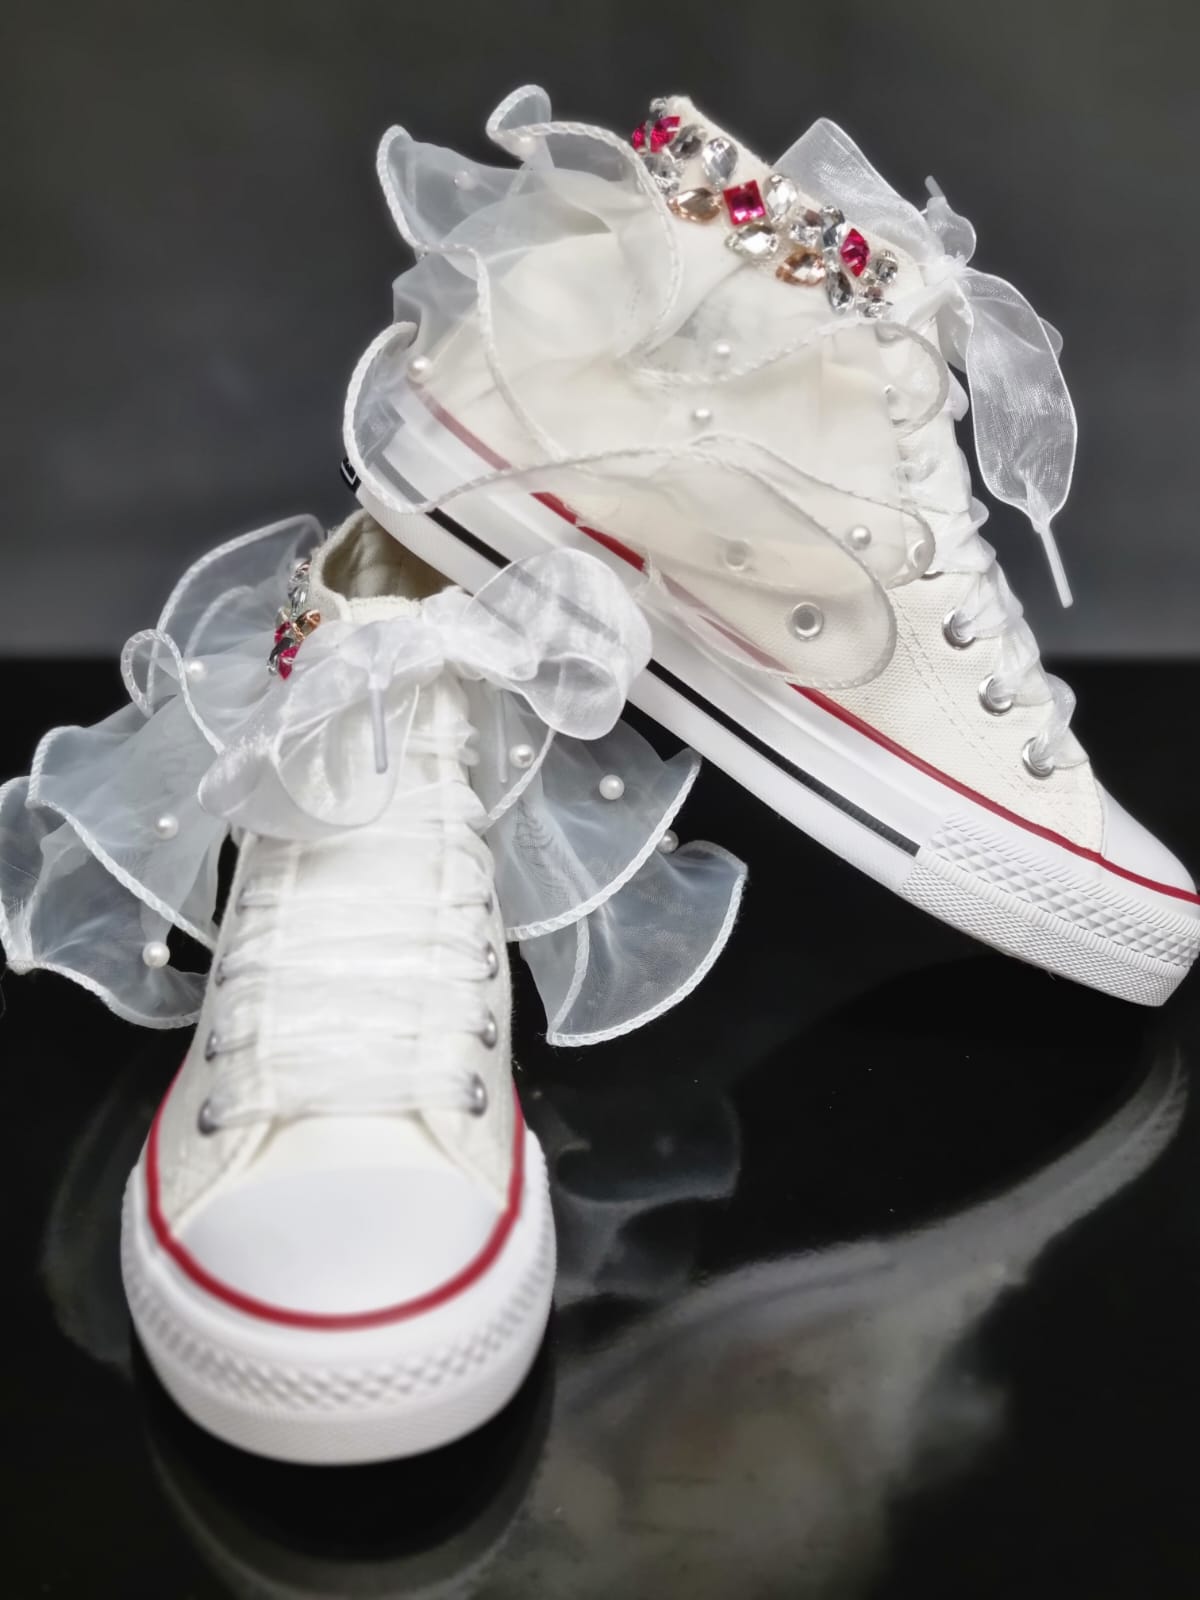 cocobee-White Converse Shoes with Pearls and Sparkly Rhinestones-1